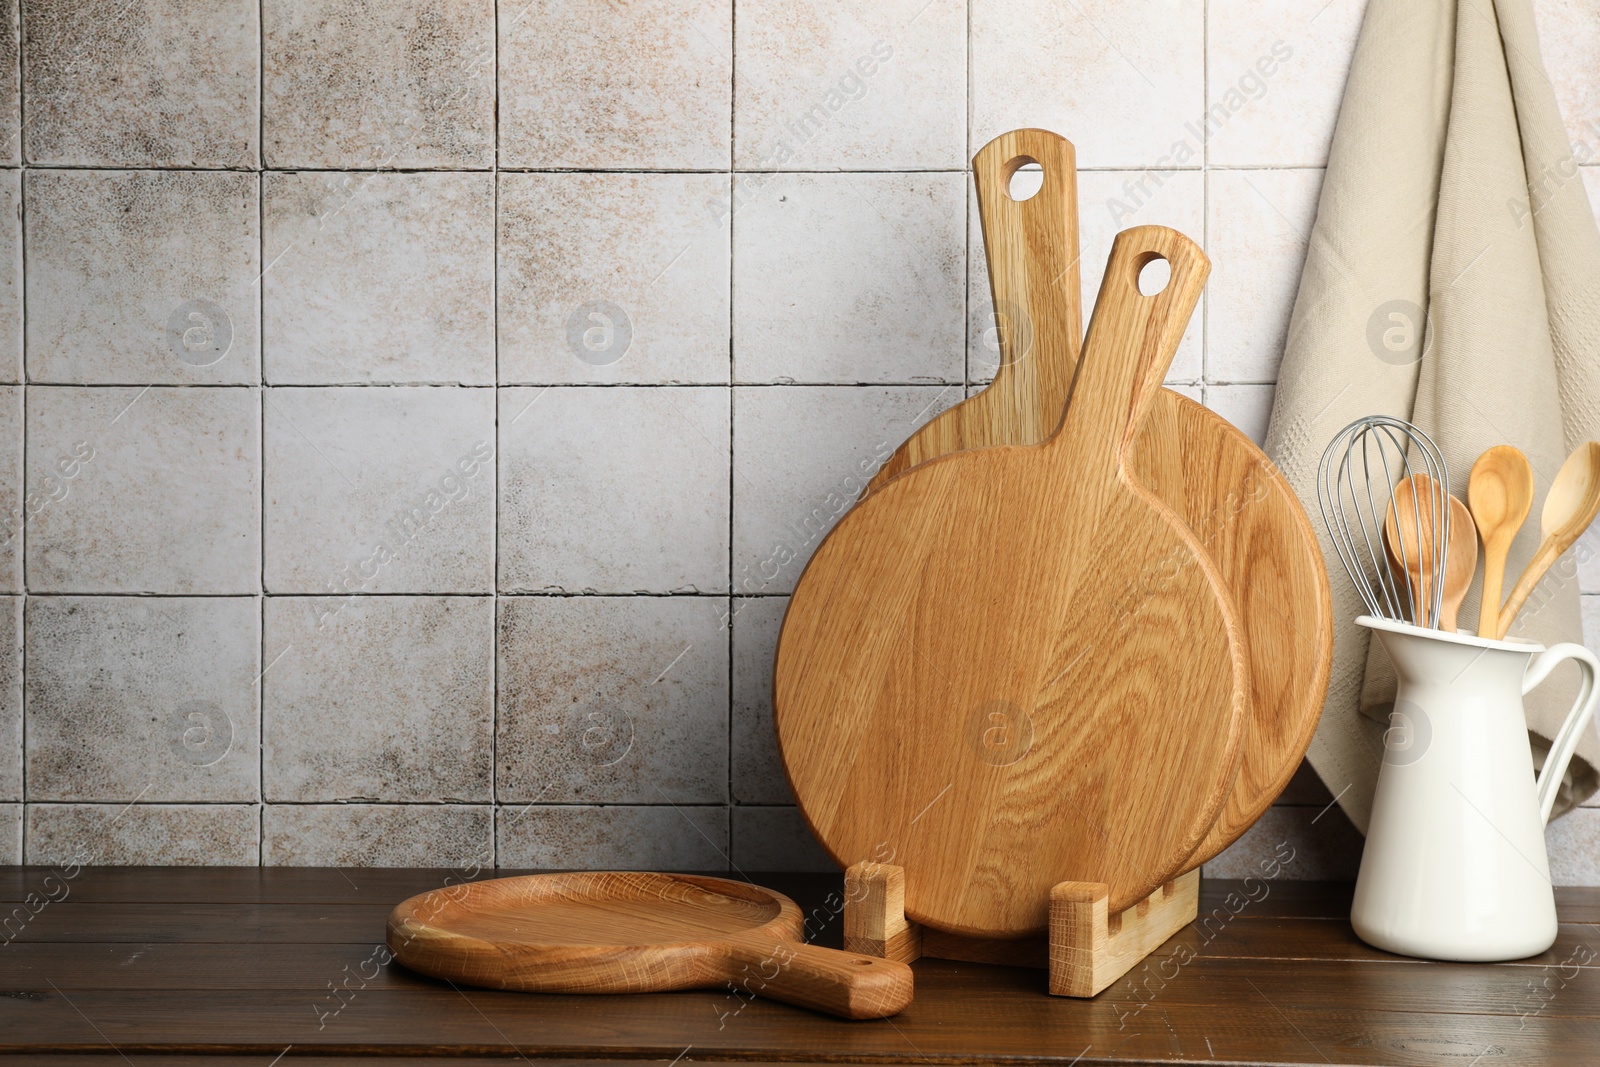 Photo of Wooden cutting boards and kitchen utensils on table near tiled wall. Space for text